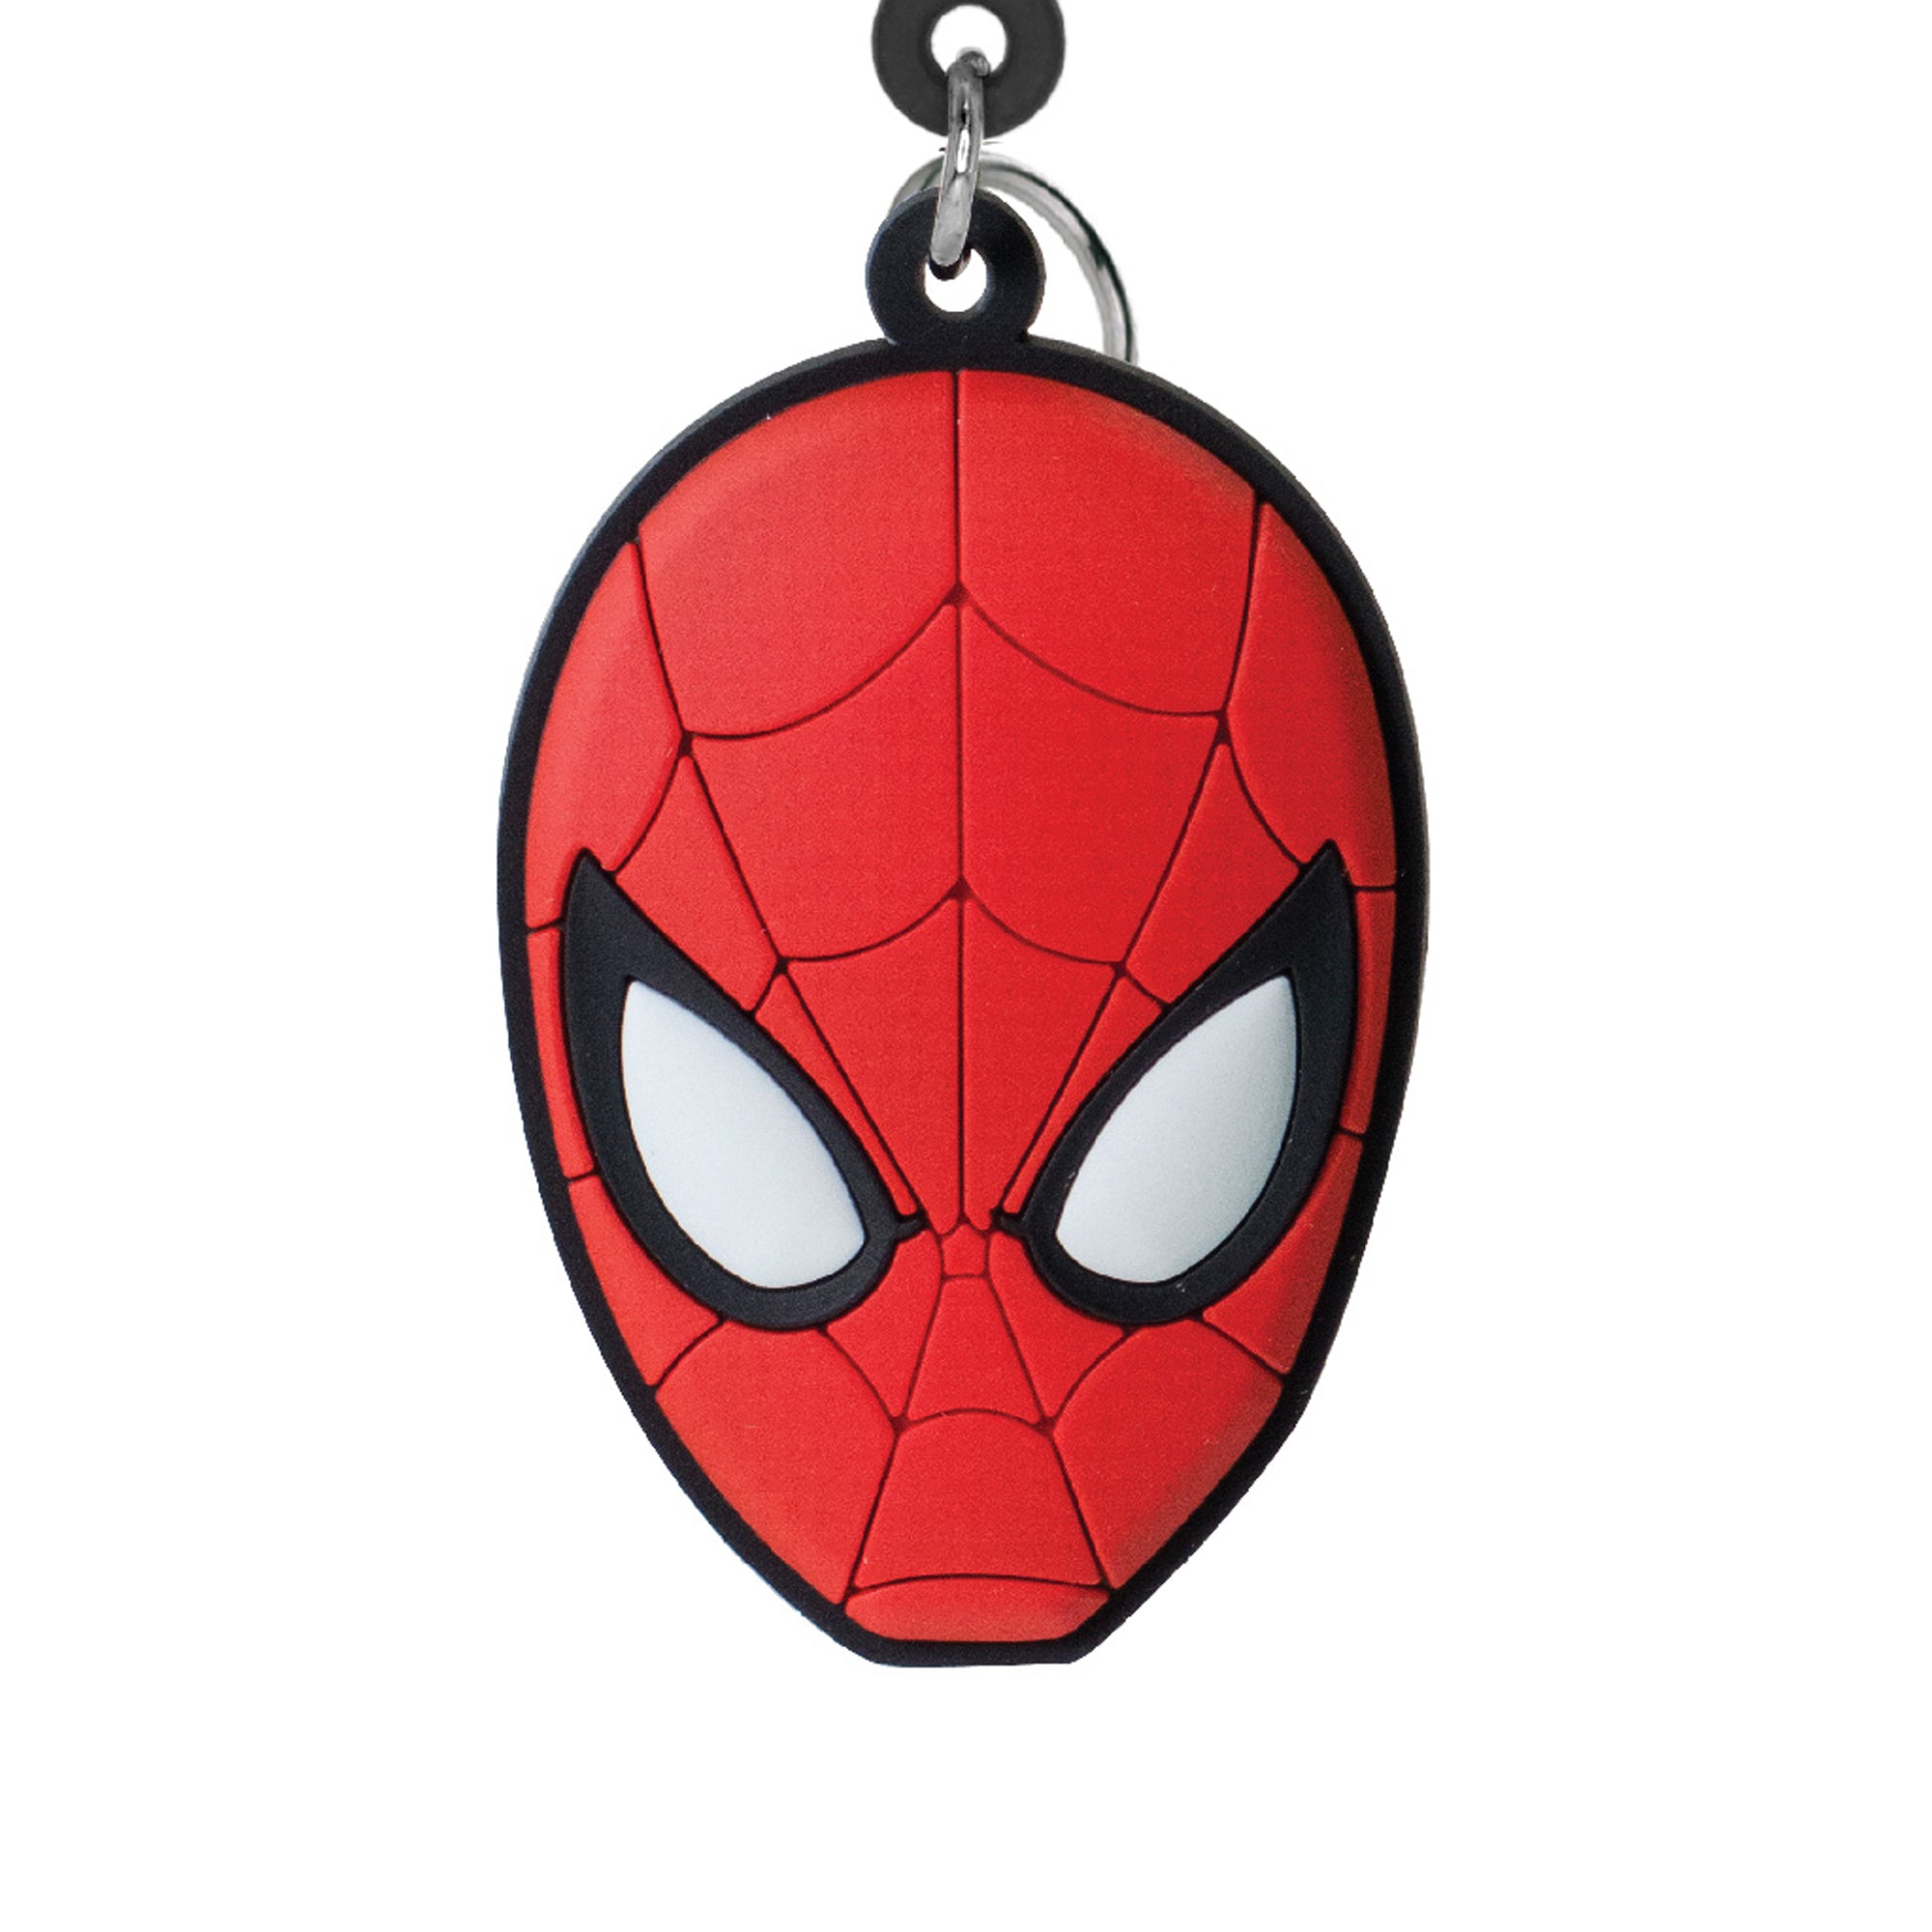 Marvel Spiderman Mask Collectible Soft Touch Bag Clip/Luggage Charm